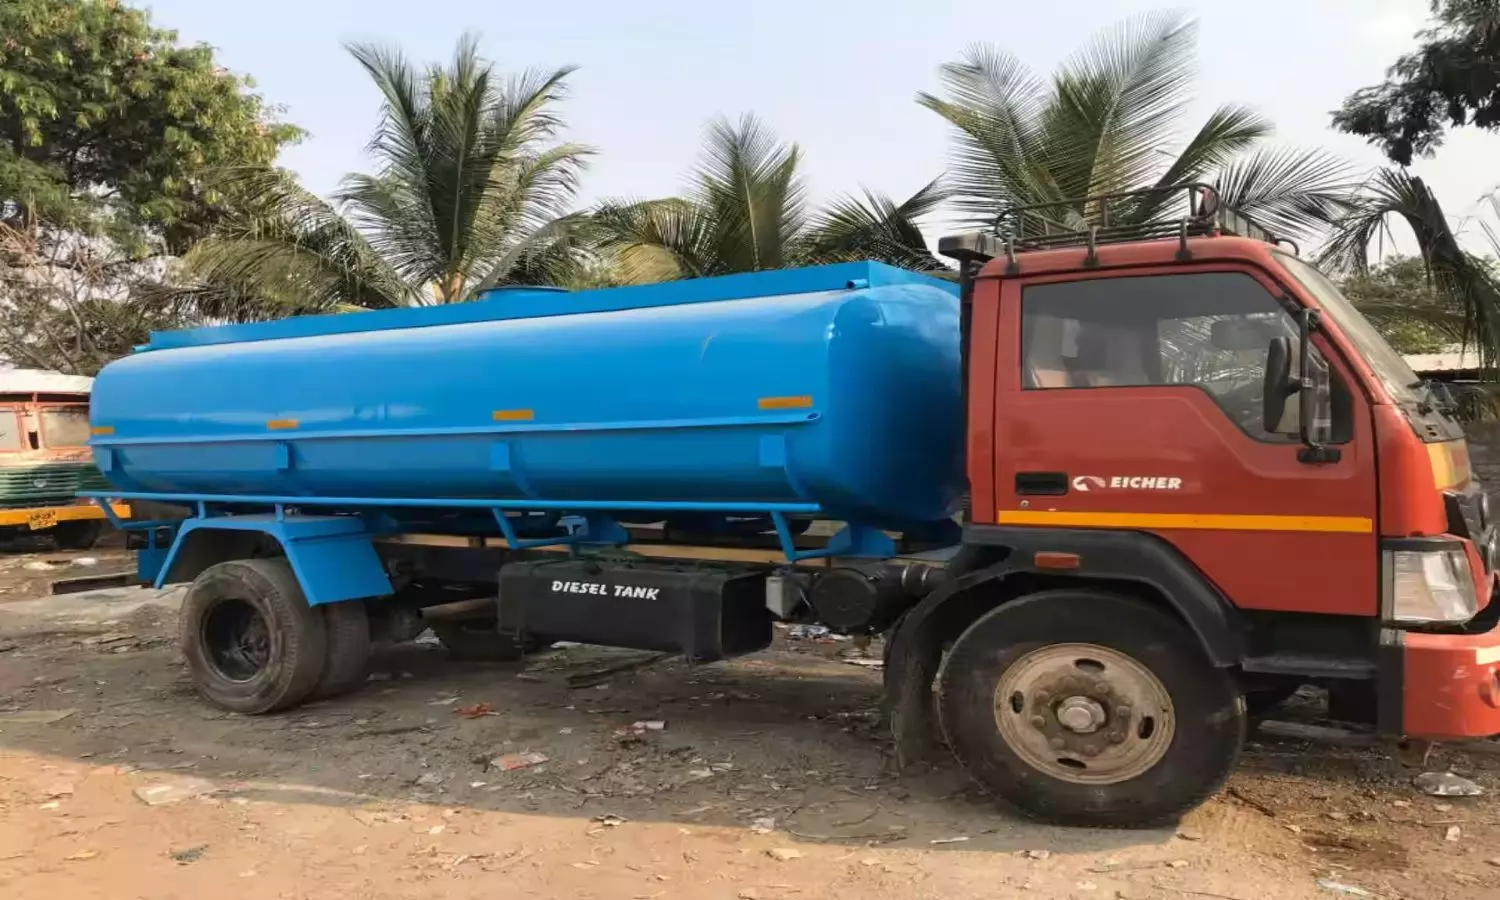 Hyderabad parched: Illegal tanker diversion deepens water scarcity